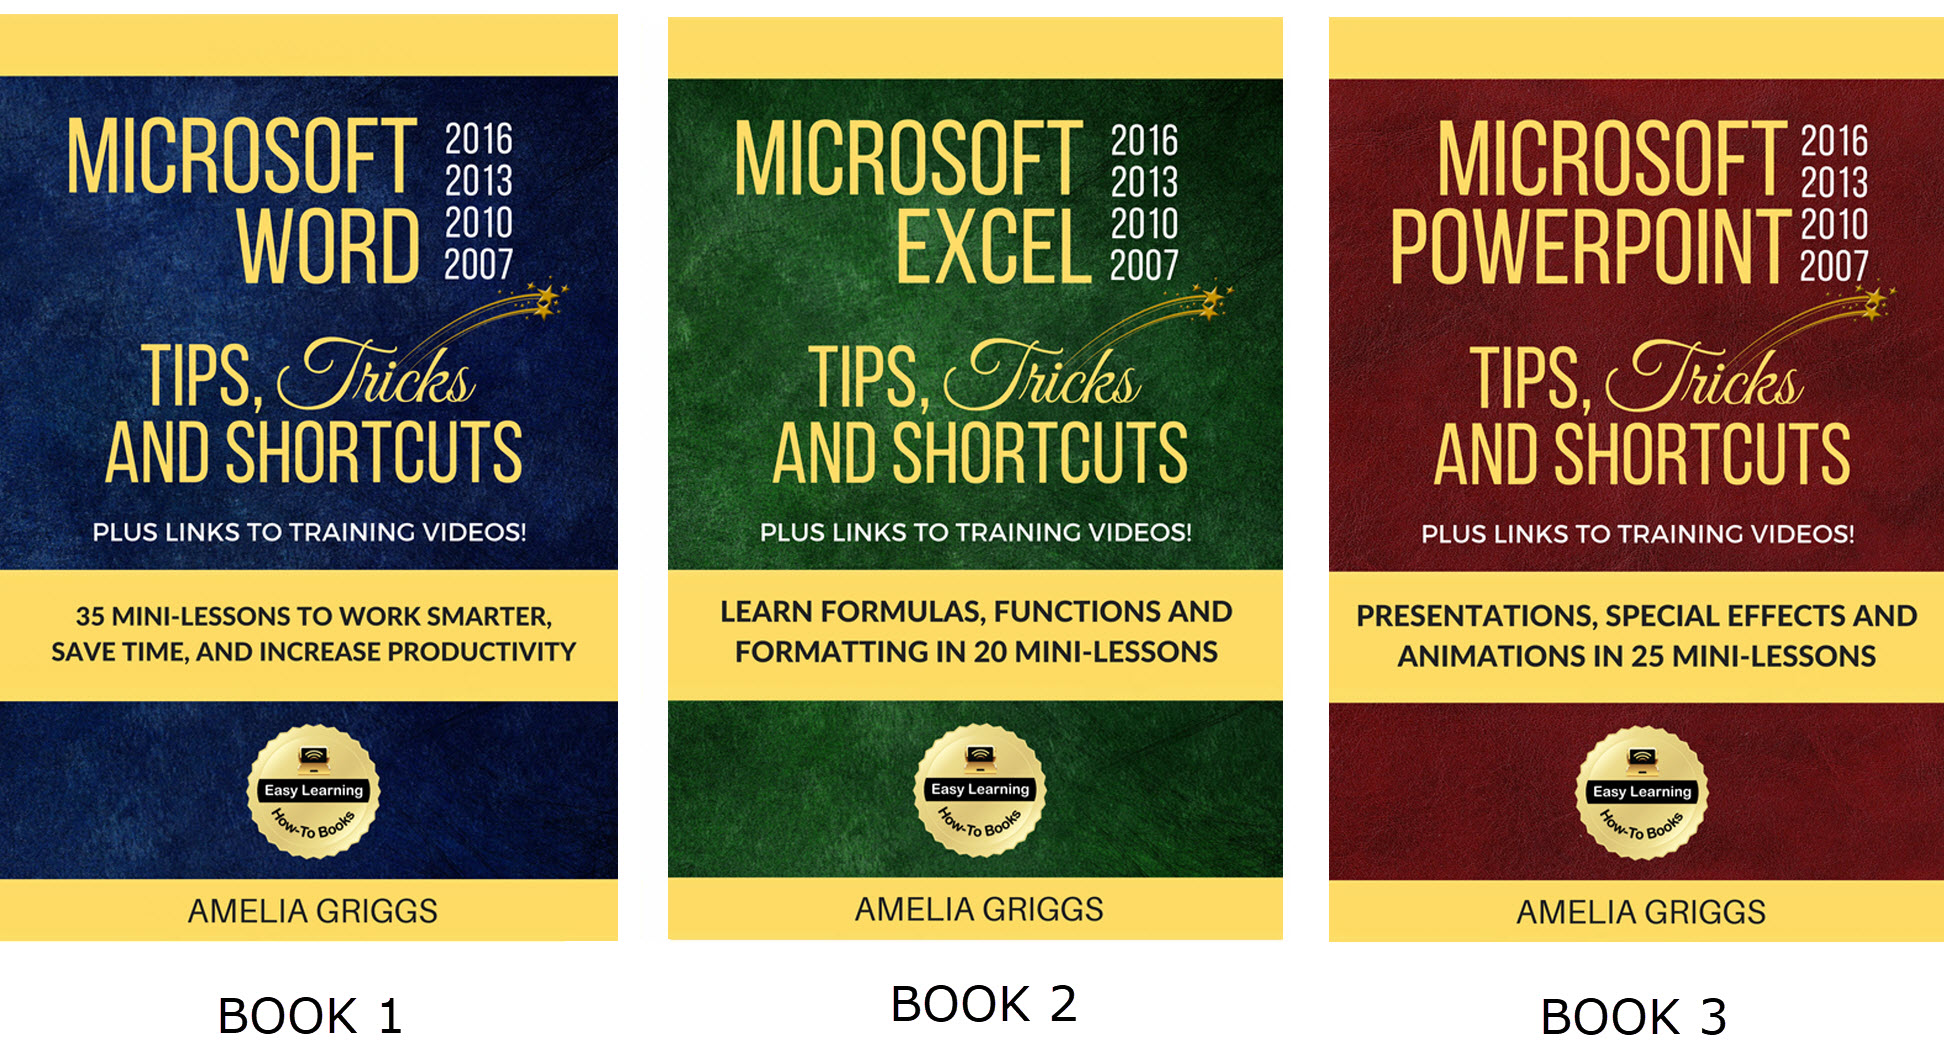 Microsoft Word, Excel and PowerPoint How-To Books